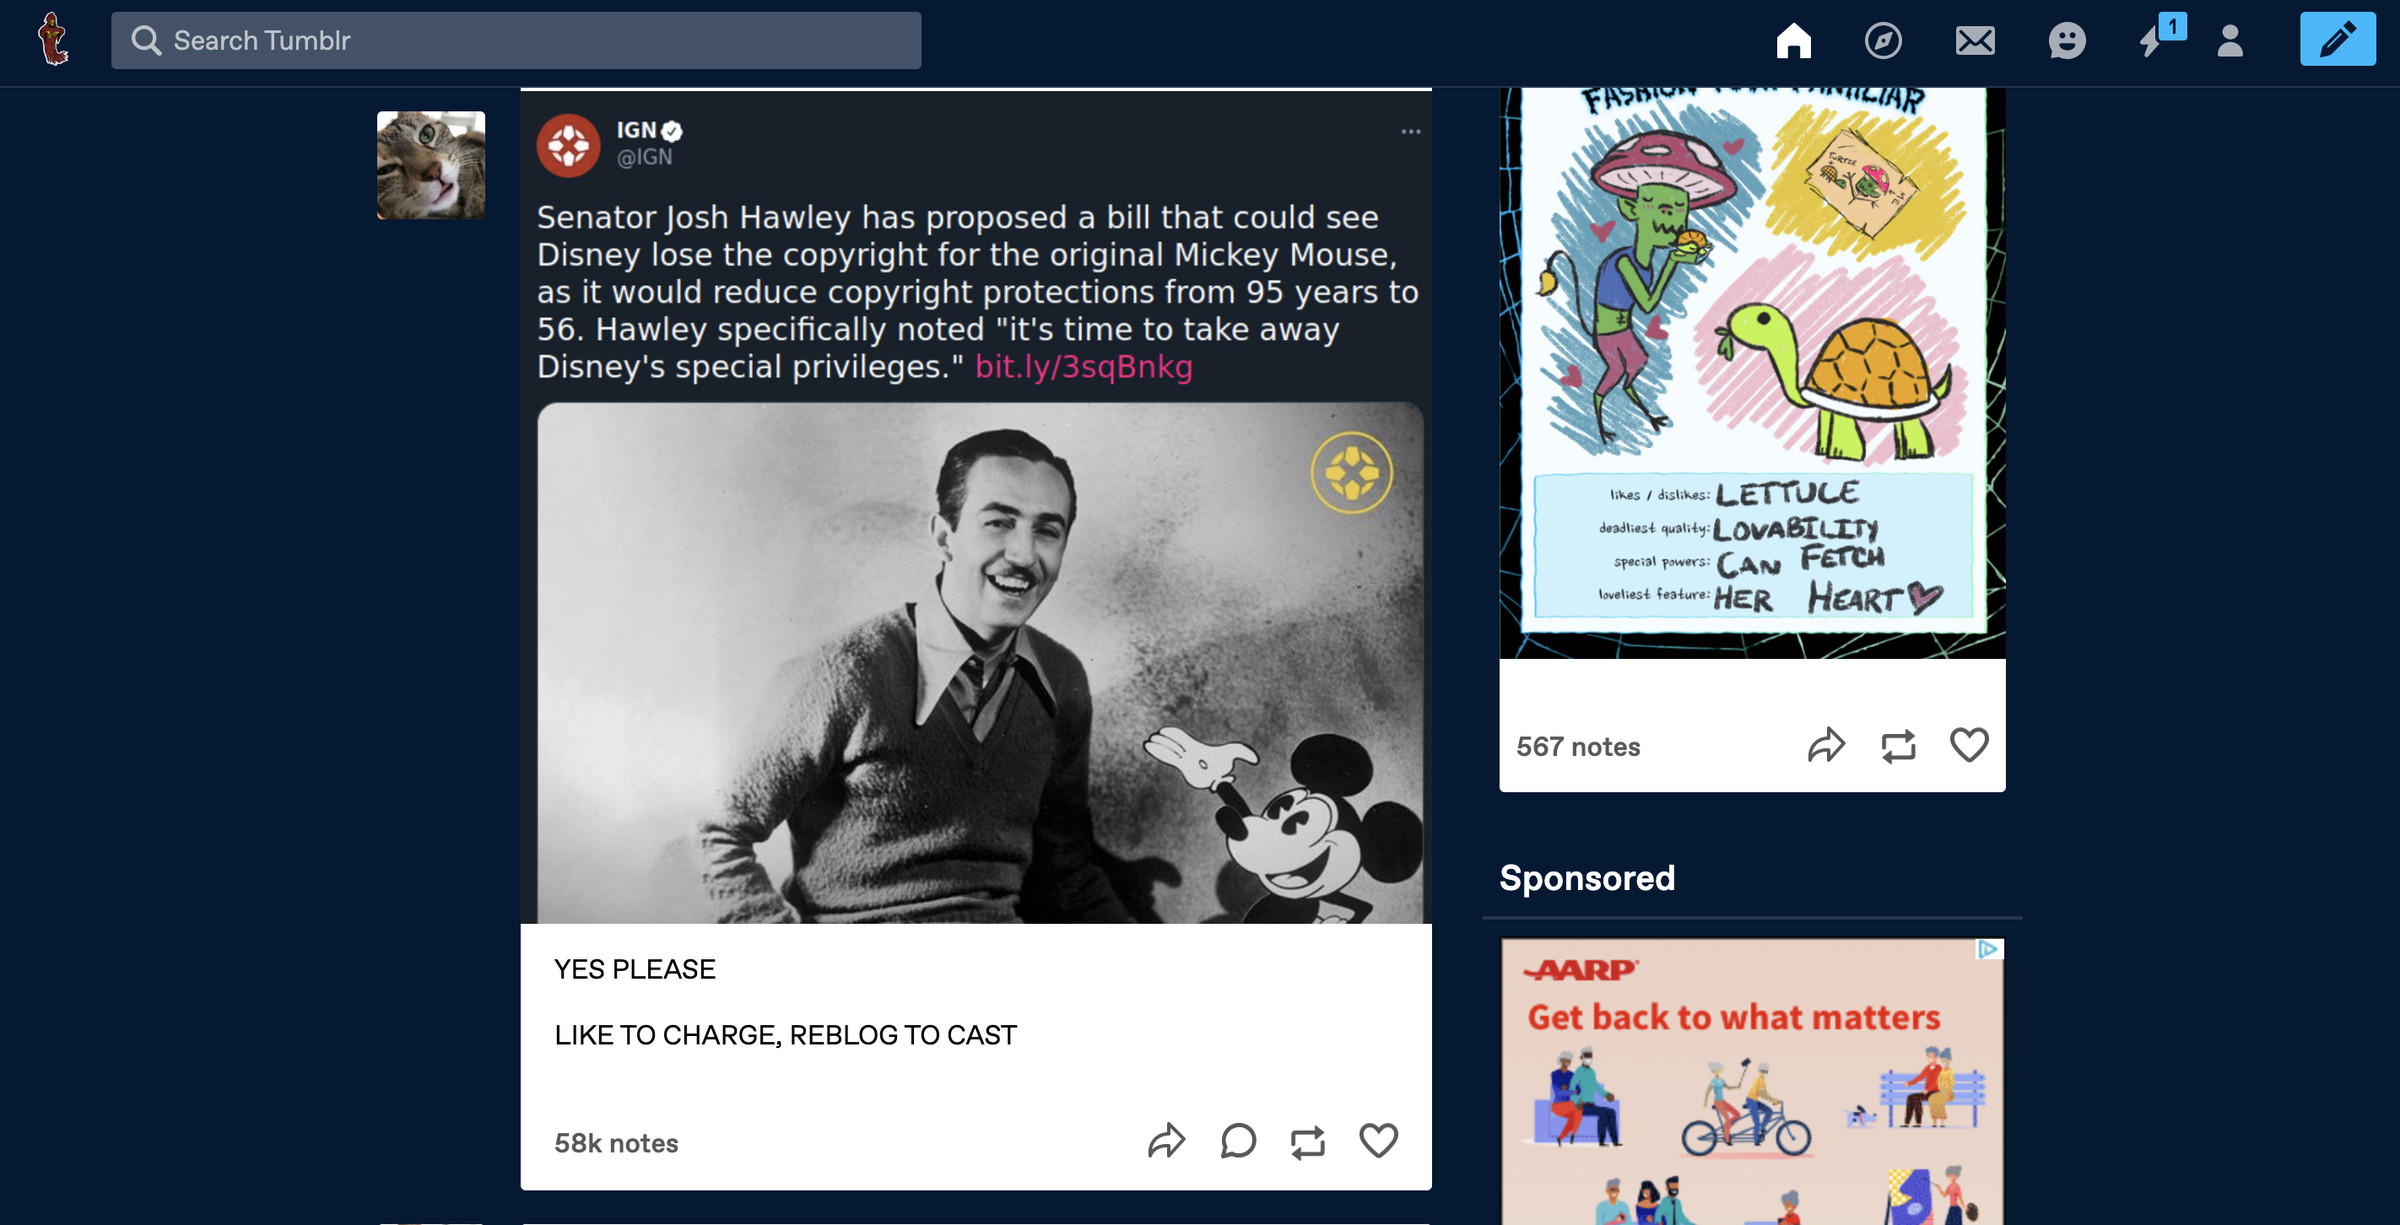 Tumblr page with an IGN article with a photo of Walt Disney.